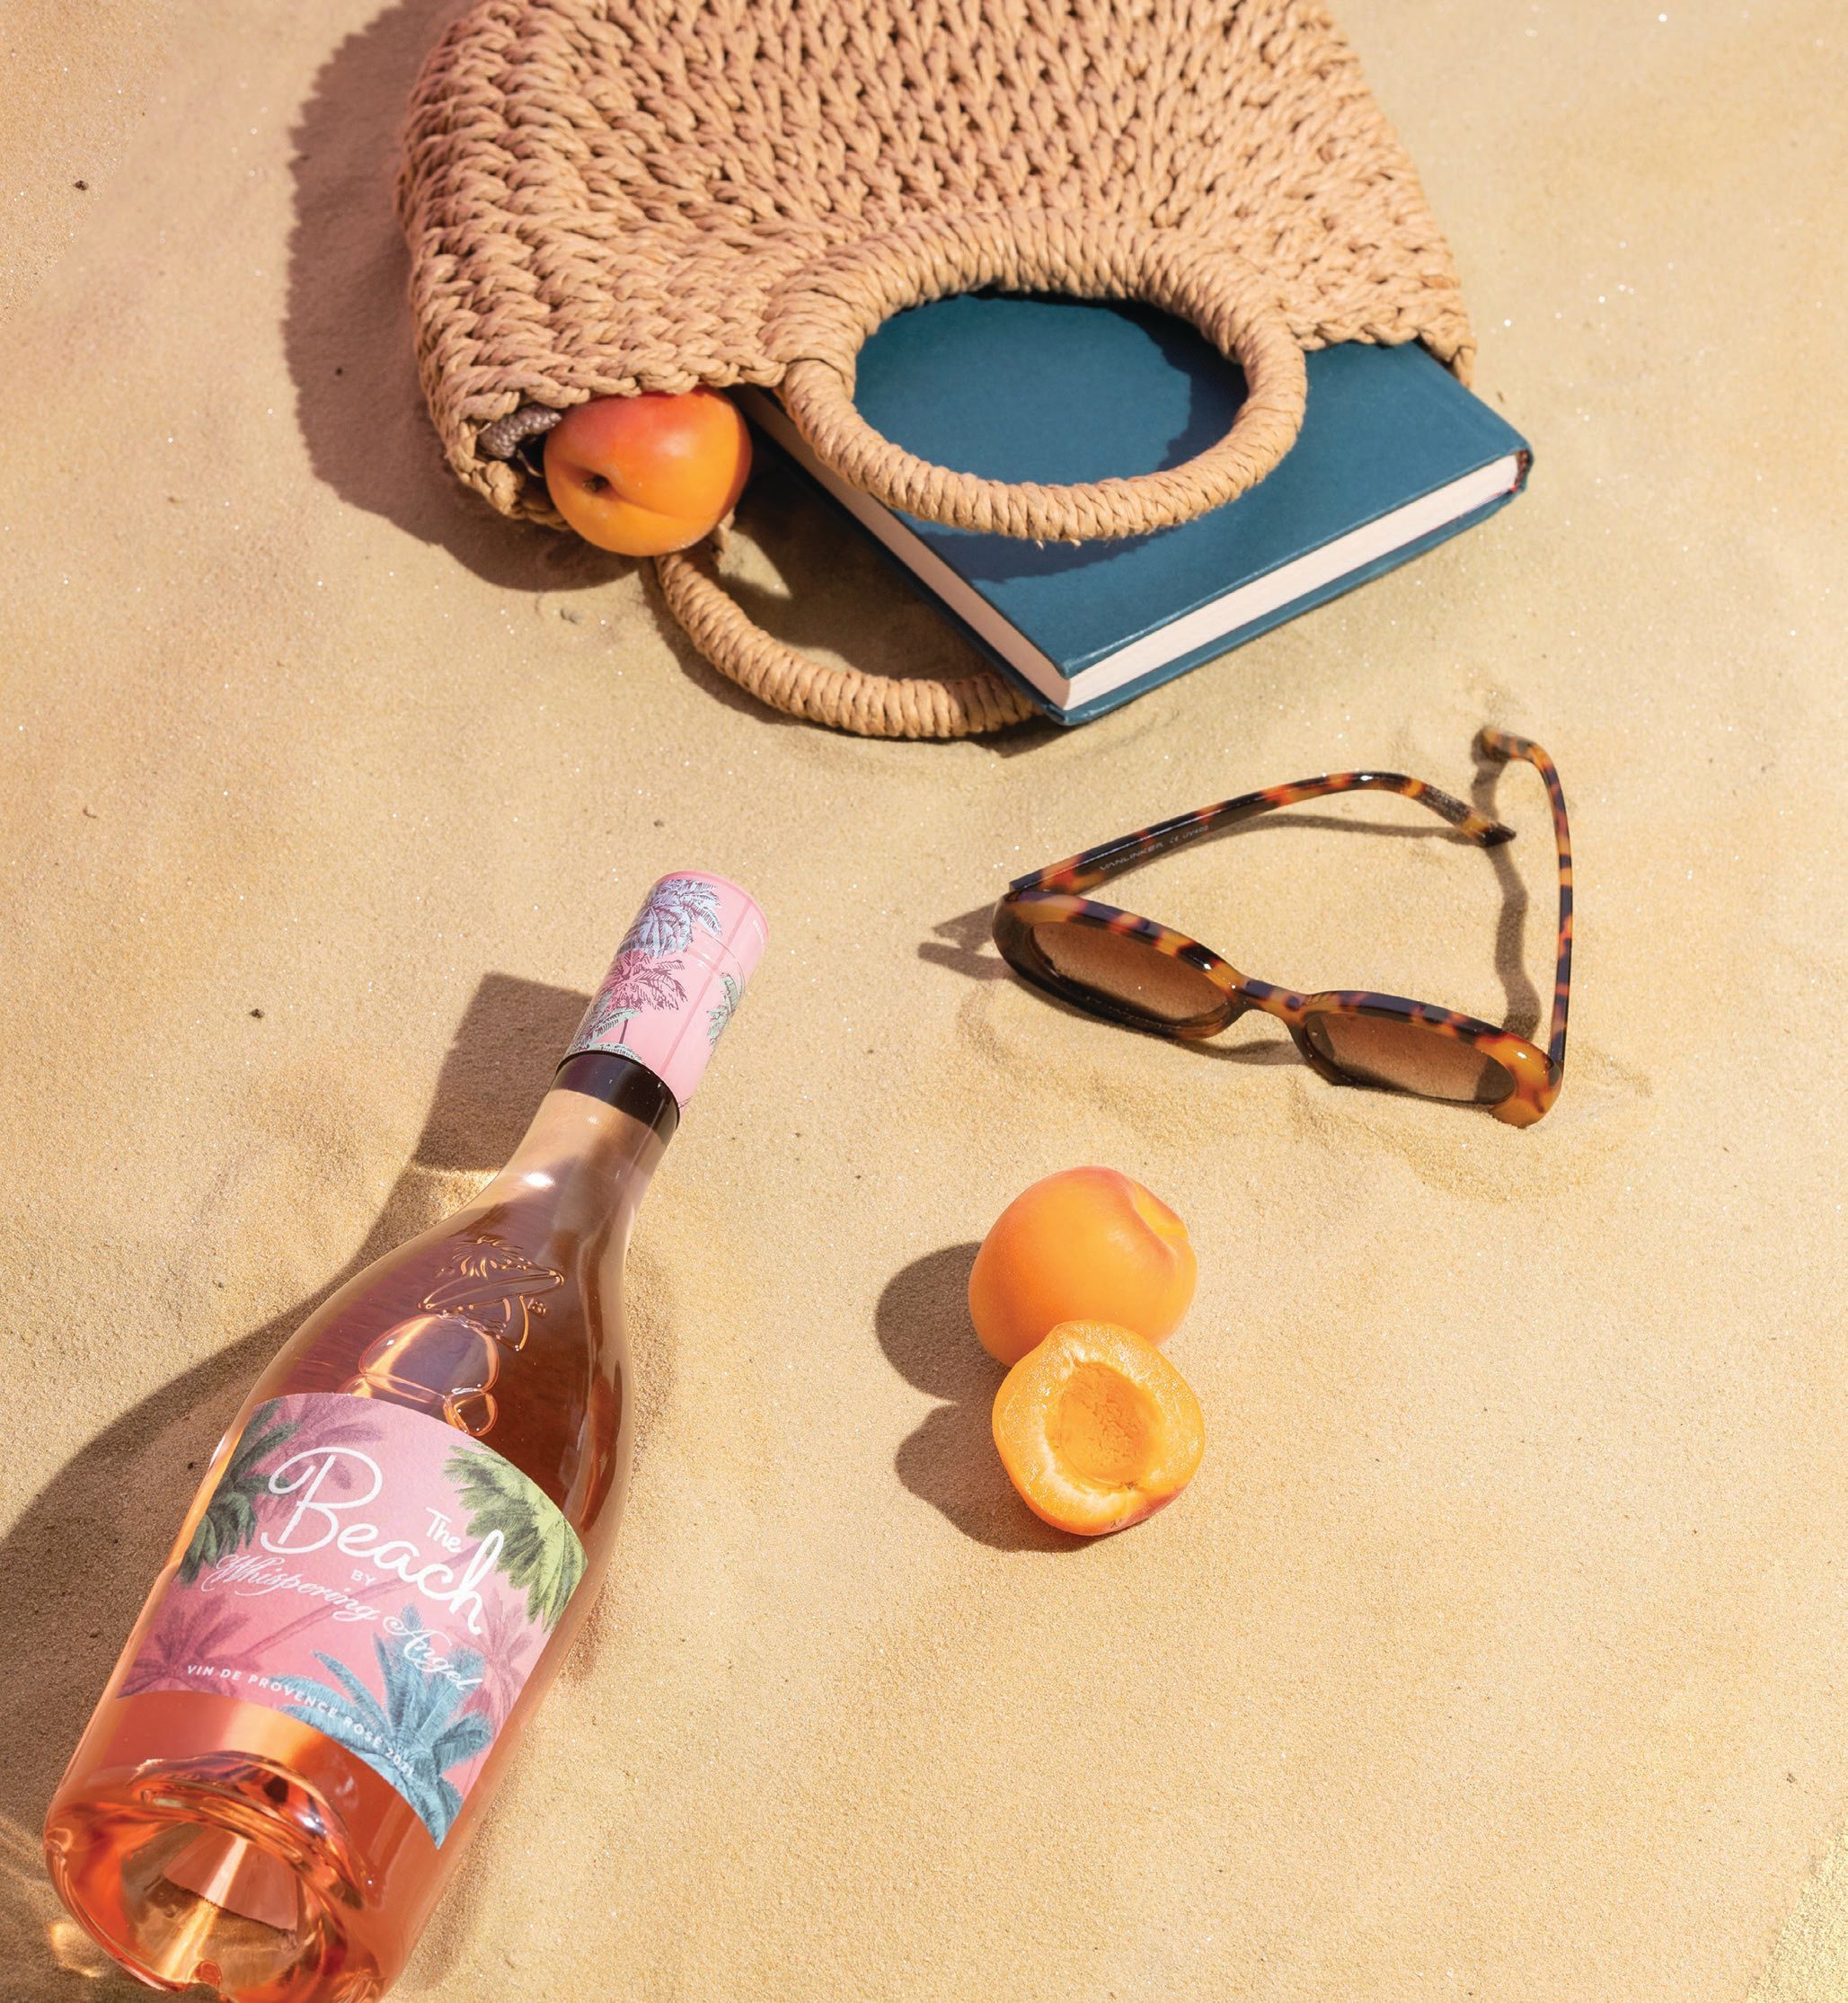 The Beach by Whispering Angel Rosé PHOTO COURTESY OF CHÂTEAU D’ESCLANS